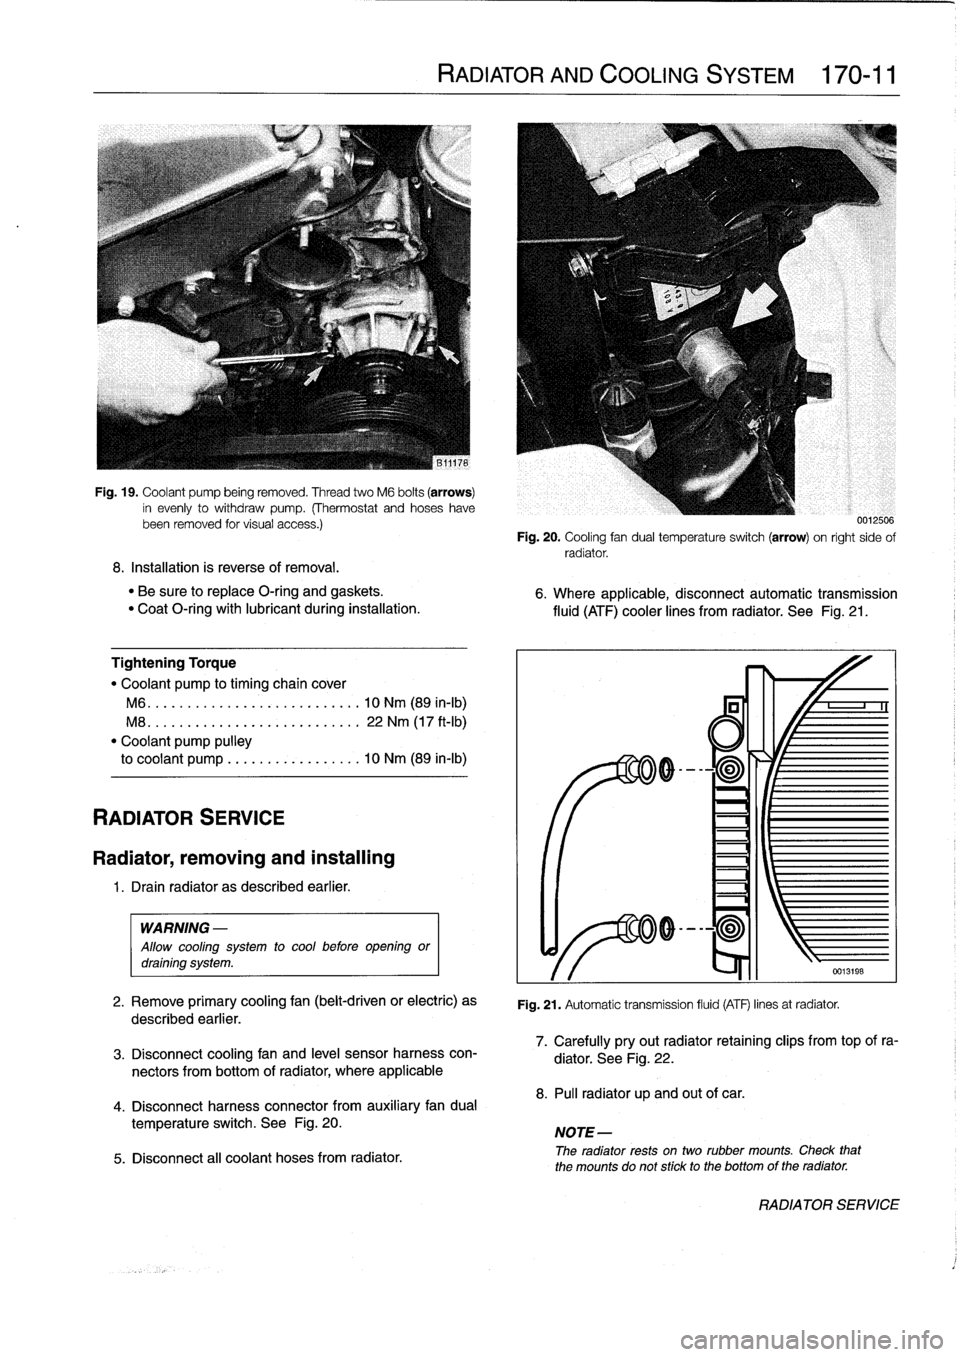 BMW 325i 1992 E36 Workshop Manual 
Fig
.
19
.
Coolant
pump
being
removed
.
Thread
two
M6
bolts
(arrows)
in
evenly
to
withdraw
pump
.
(Thermostat
and
hoseshavebeen
removed
tor
visual
access
.)

8
.
Installation
is
reverse
of
removal
.
